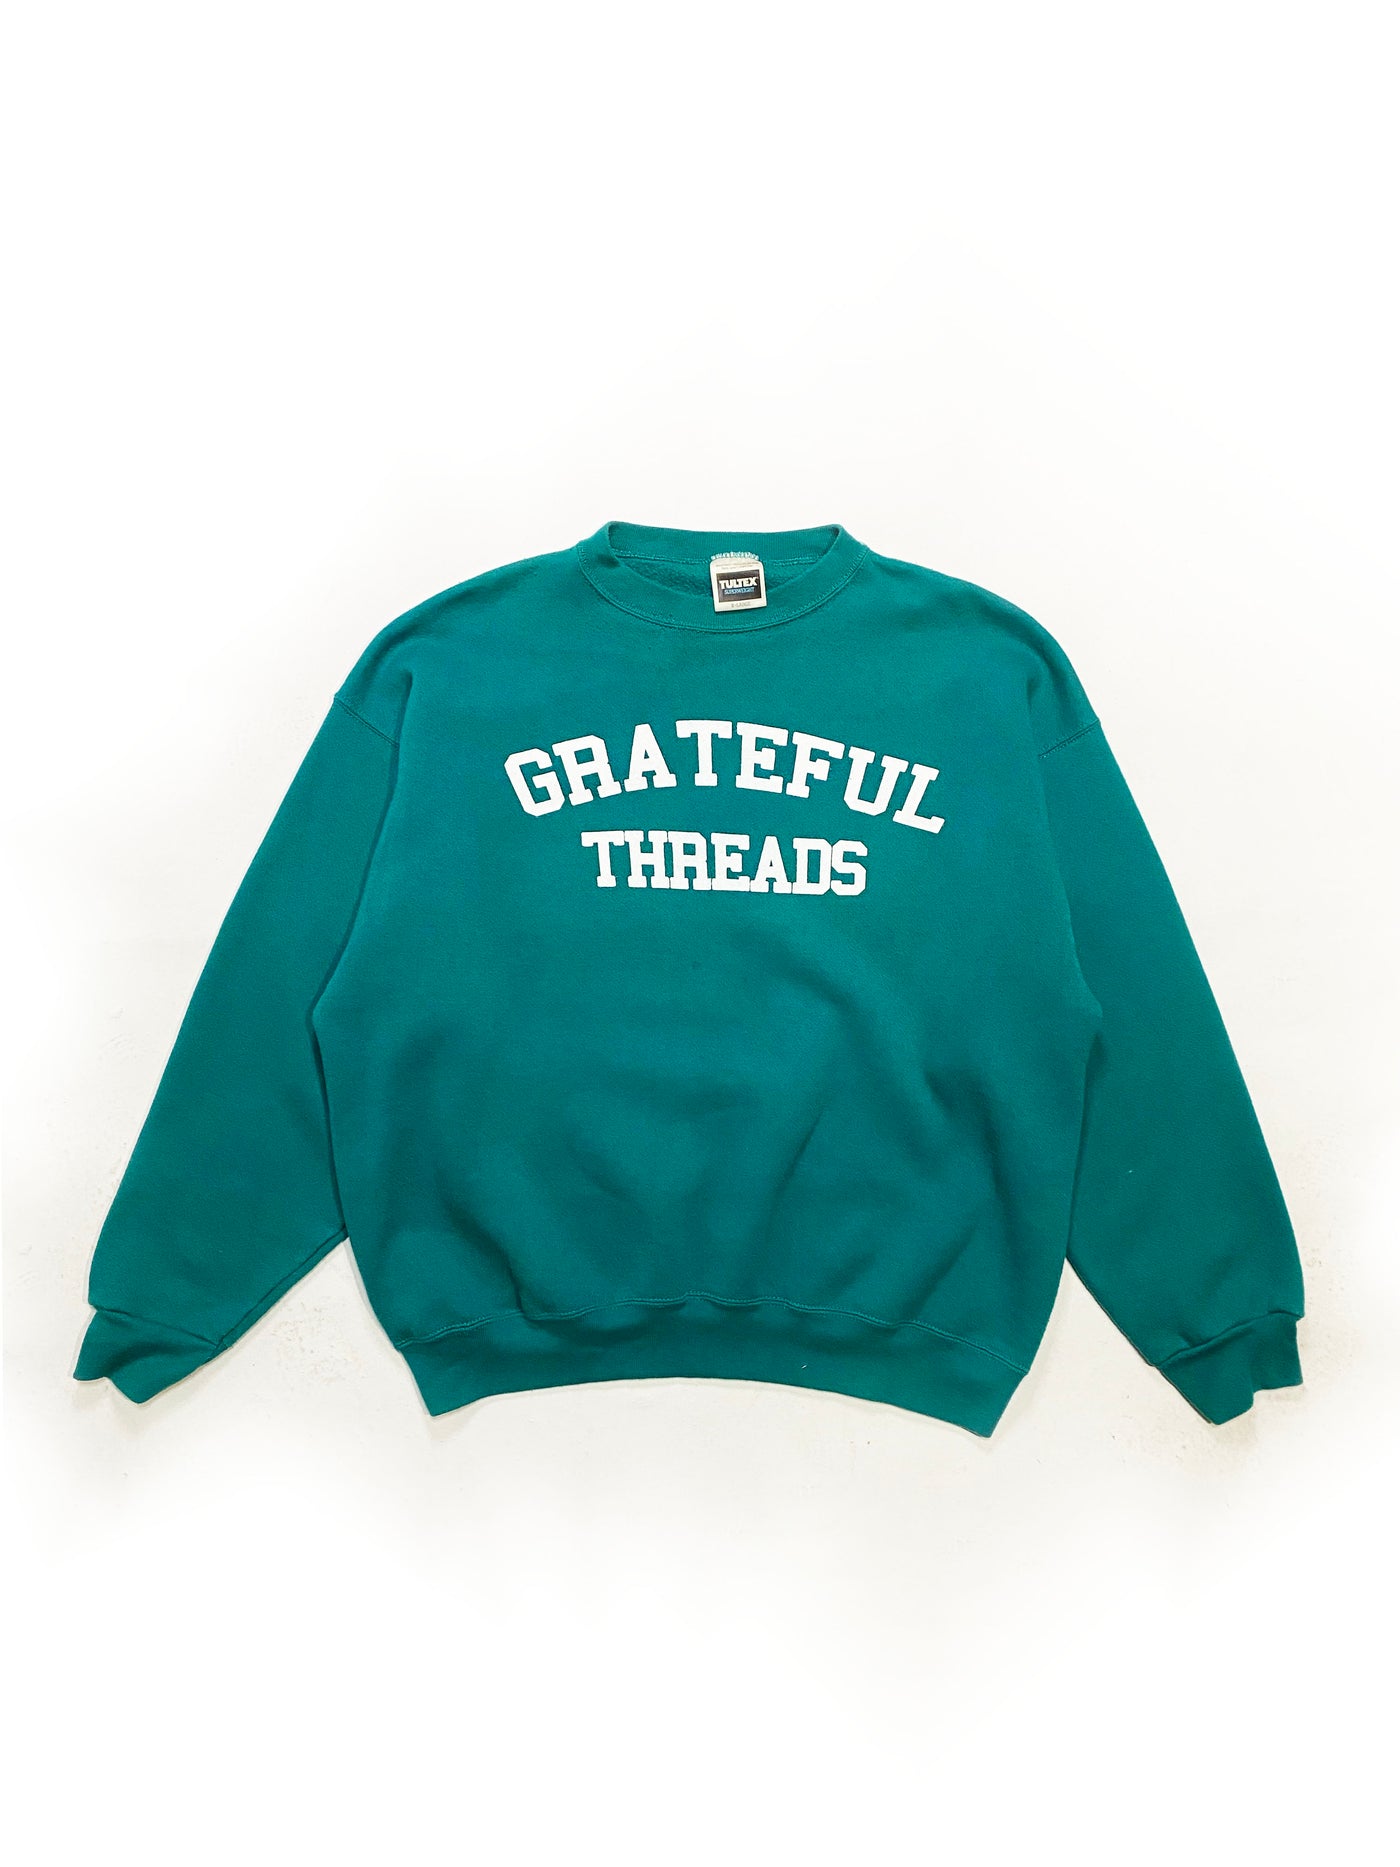 90s Tultex Grateful Threads Spellout Crewneck - Turquoise - Size XL